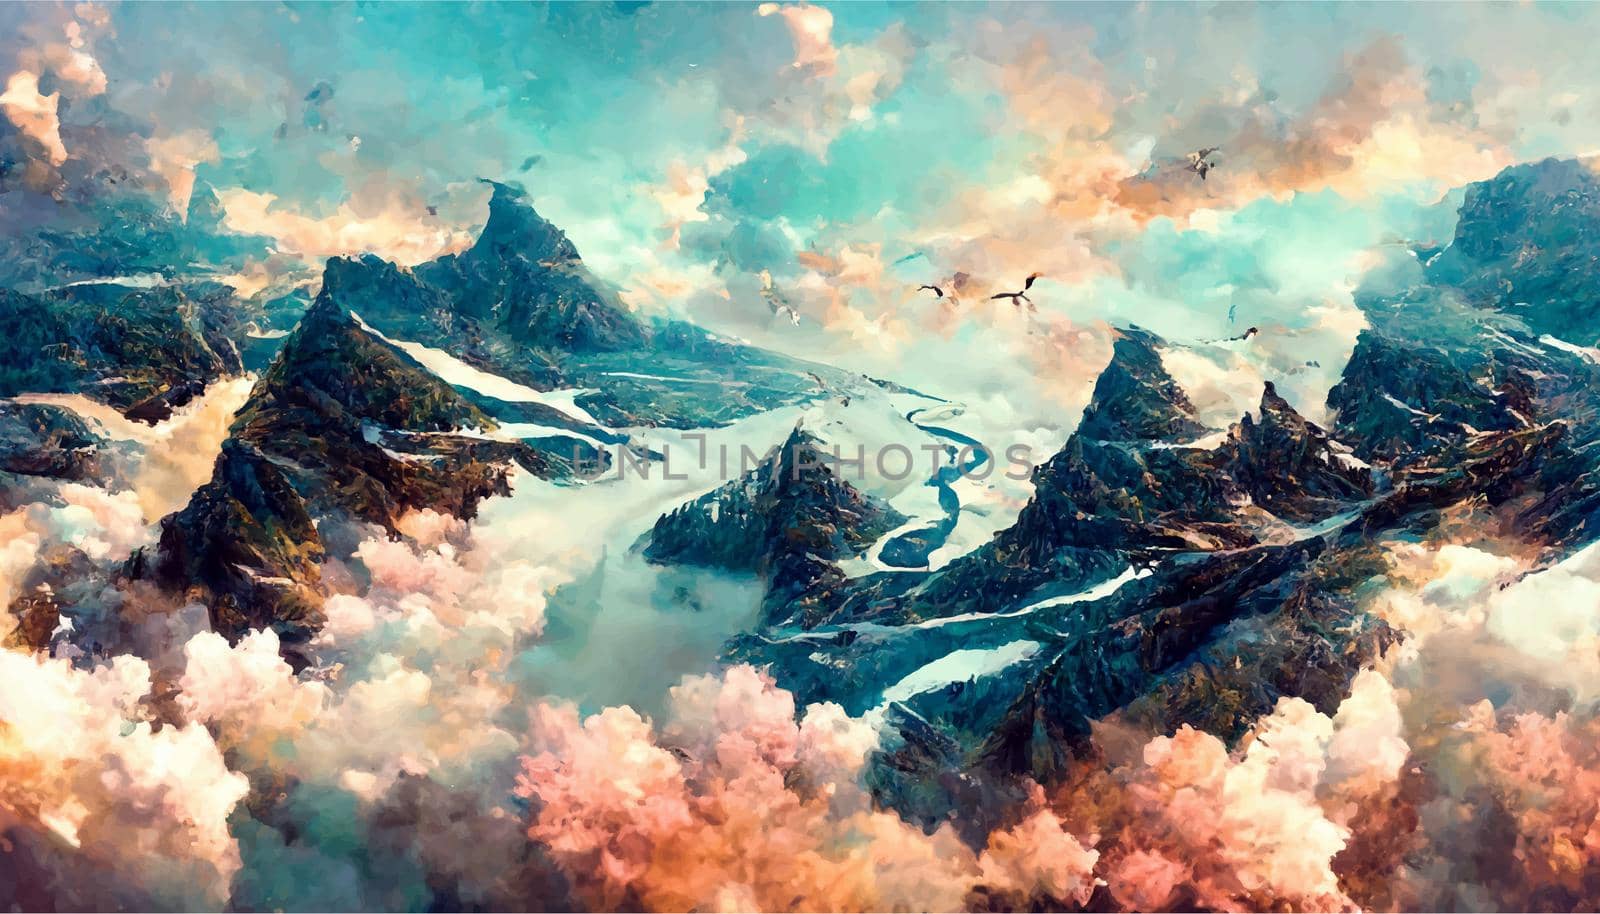 birds flying over rivers and mountains wallpaper illustration. illustration for wallpaper.